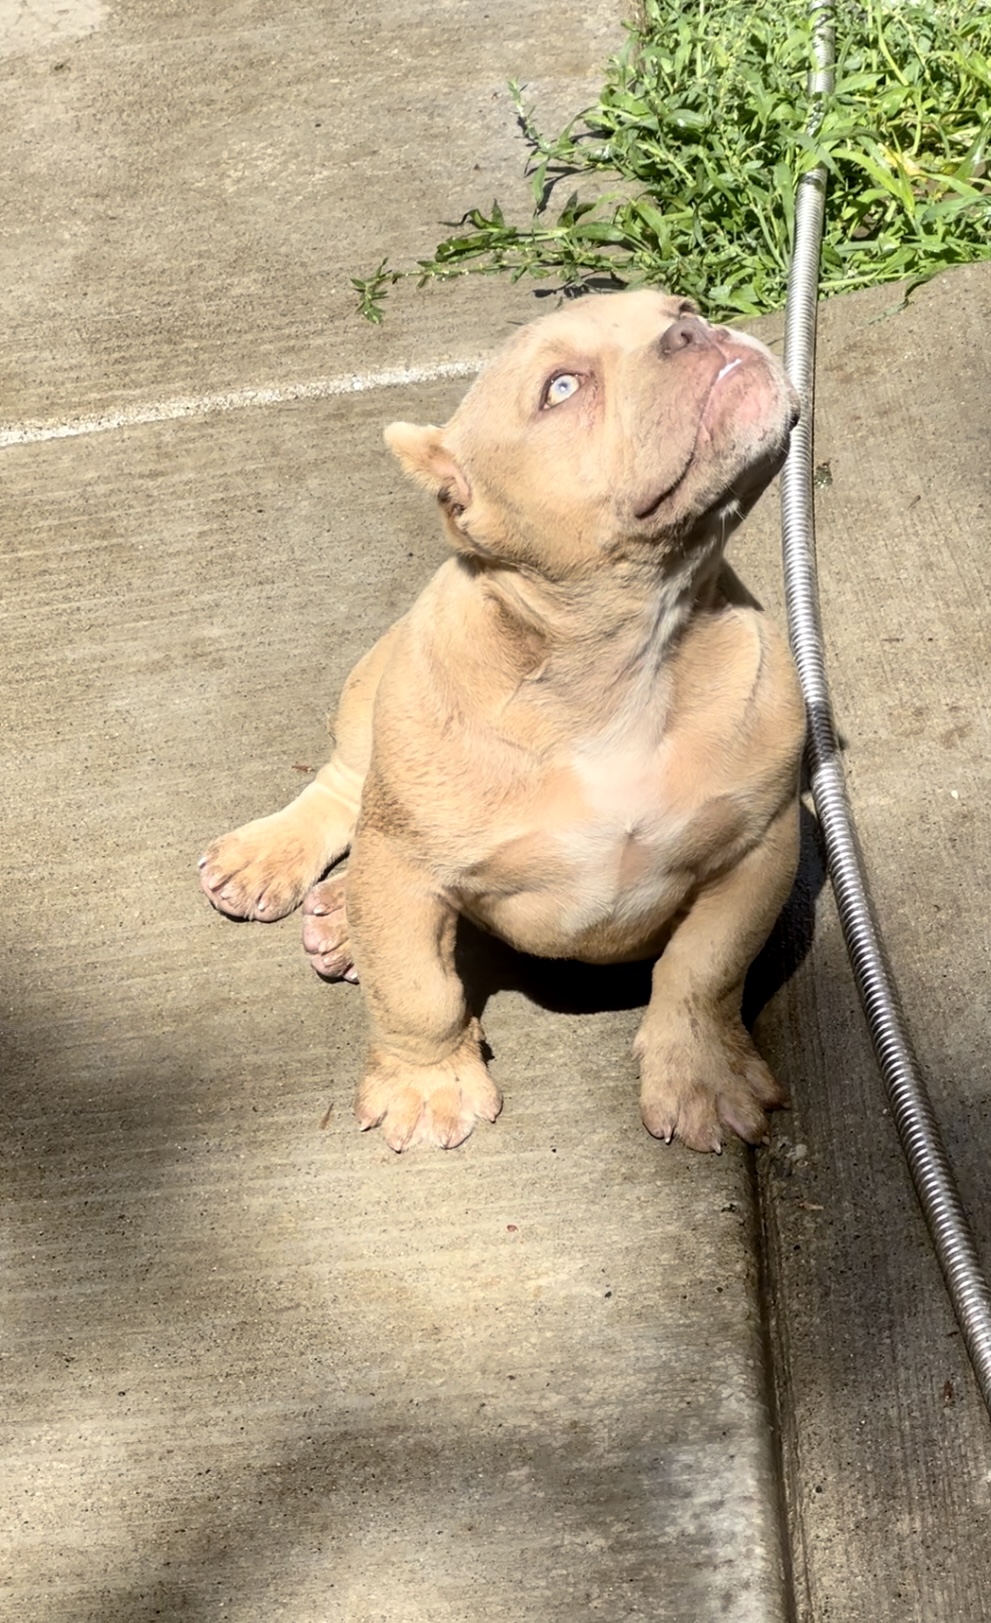 Male Exotic bully puppy for sale.